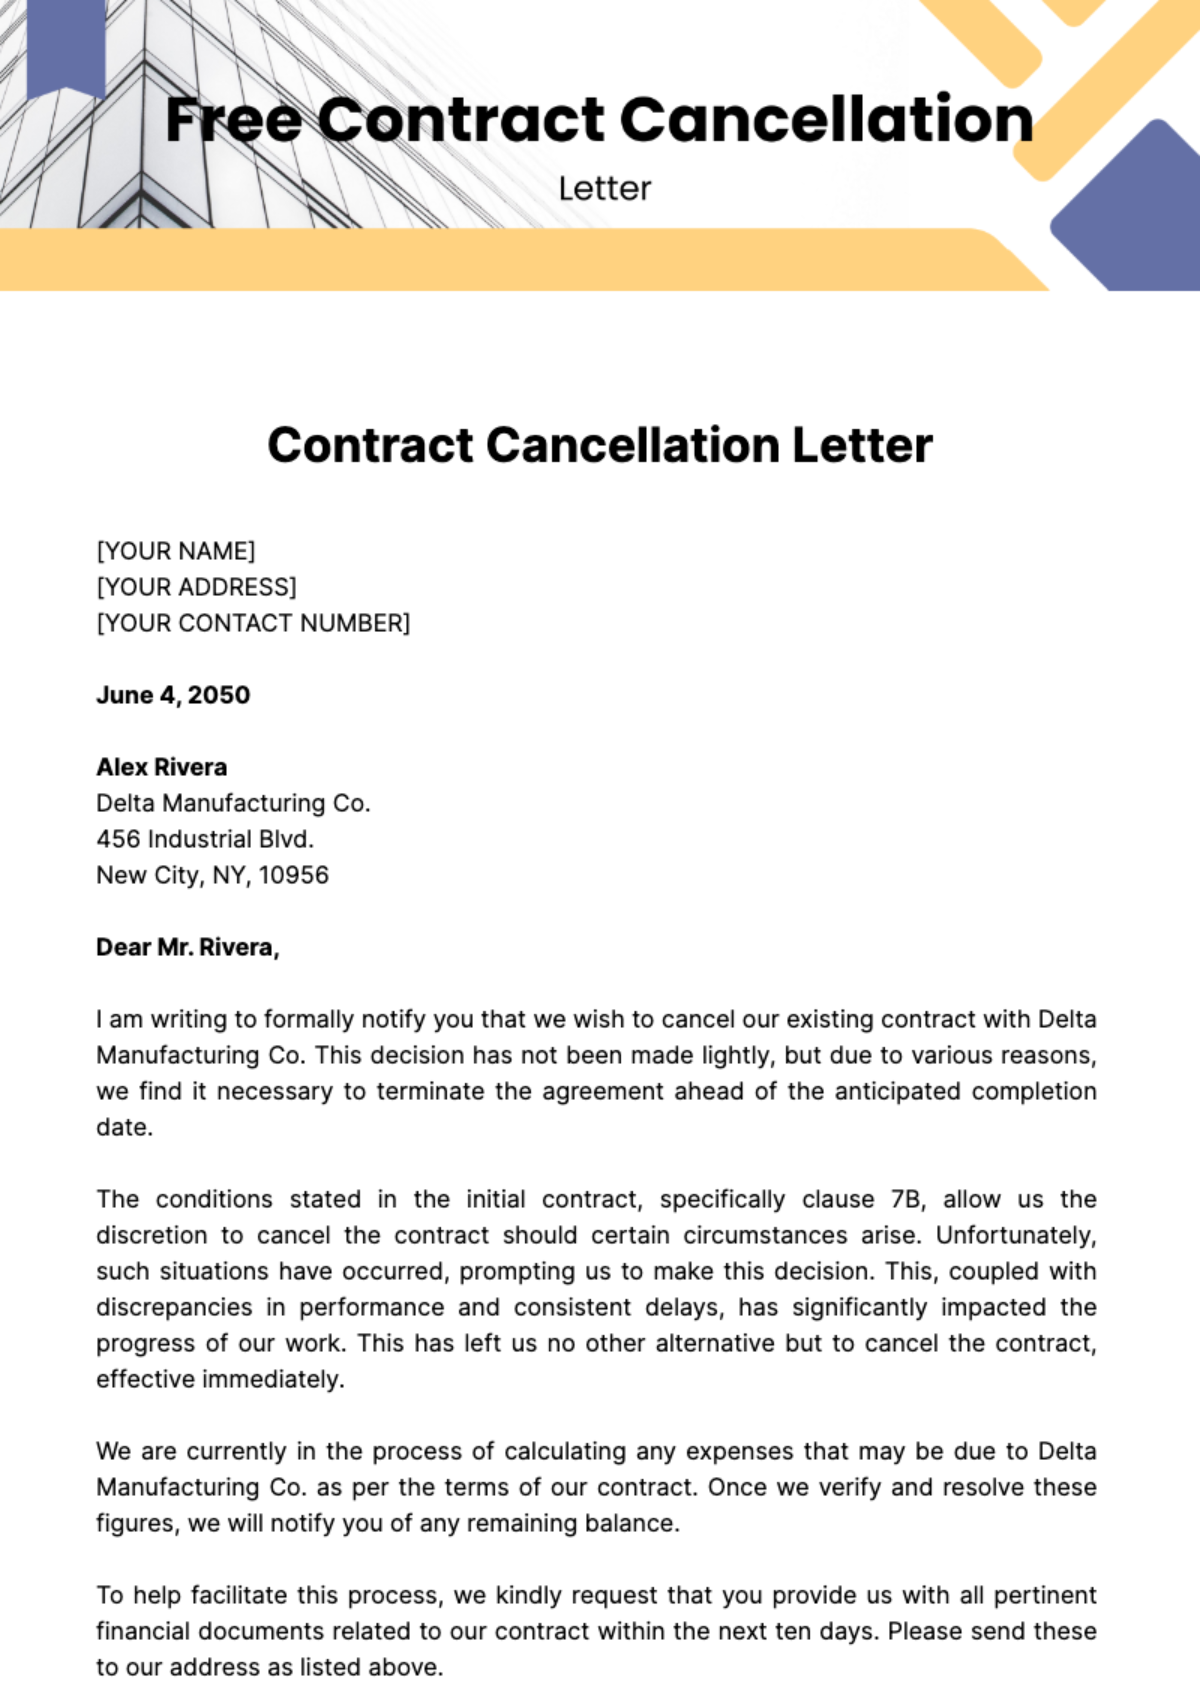 Free Contract Cancellation Letter Template